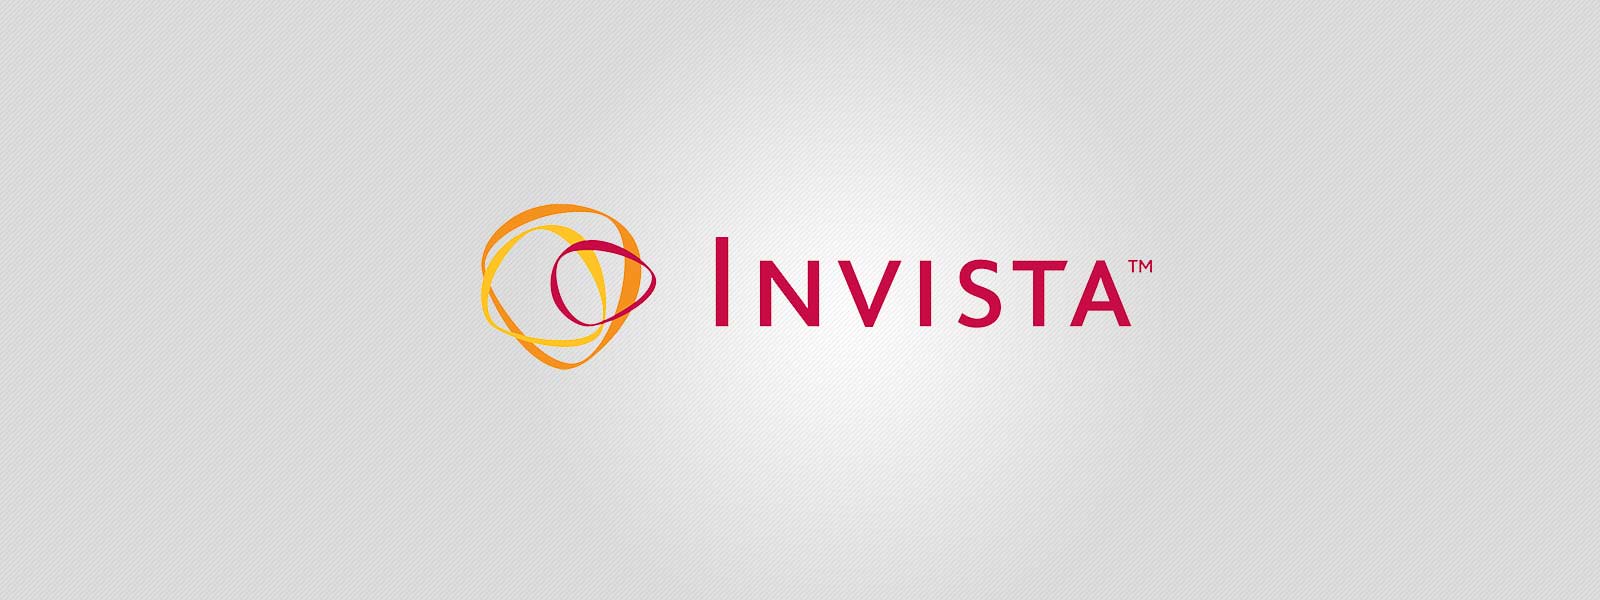 INVISTA receives patent for bio-derived raw materials technology developed through collaboration wit